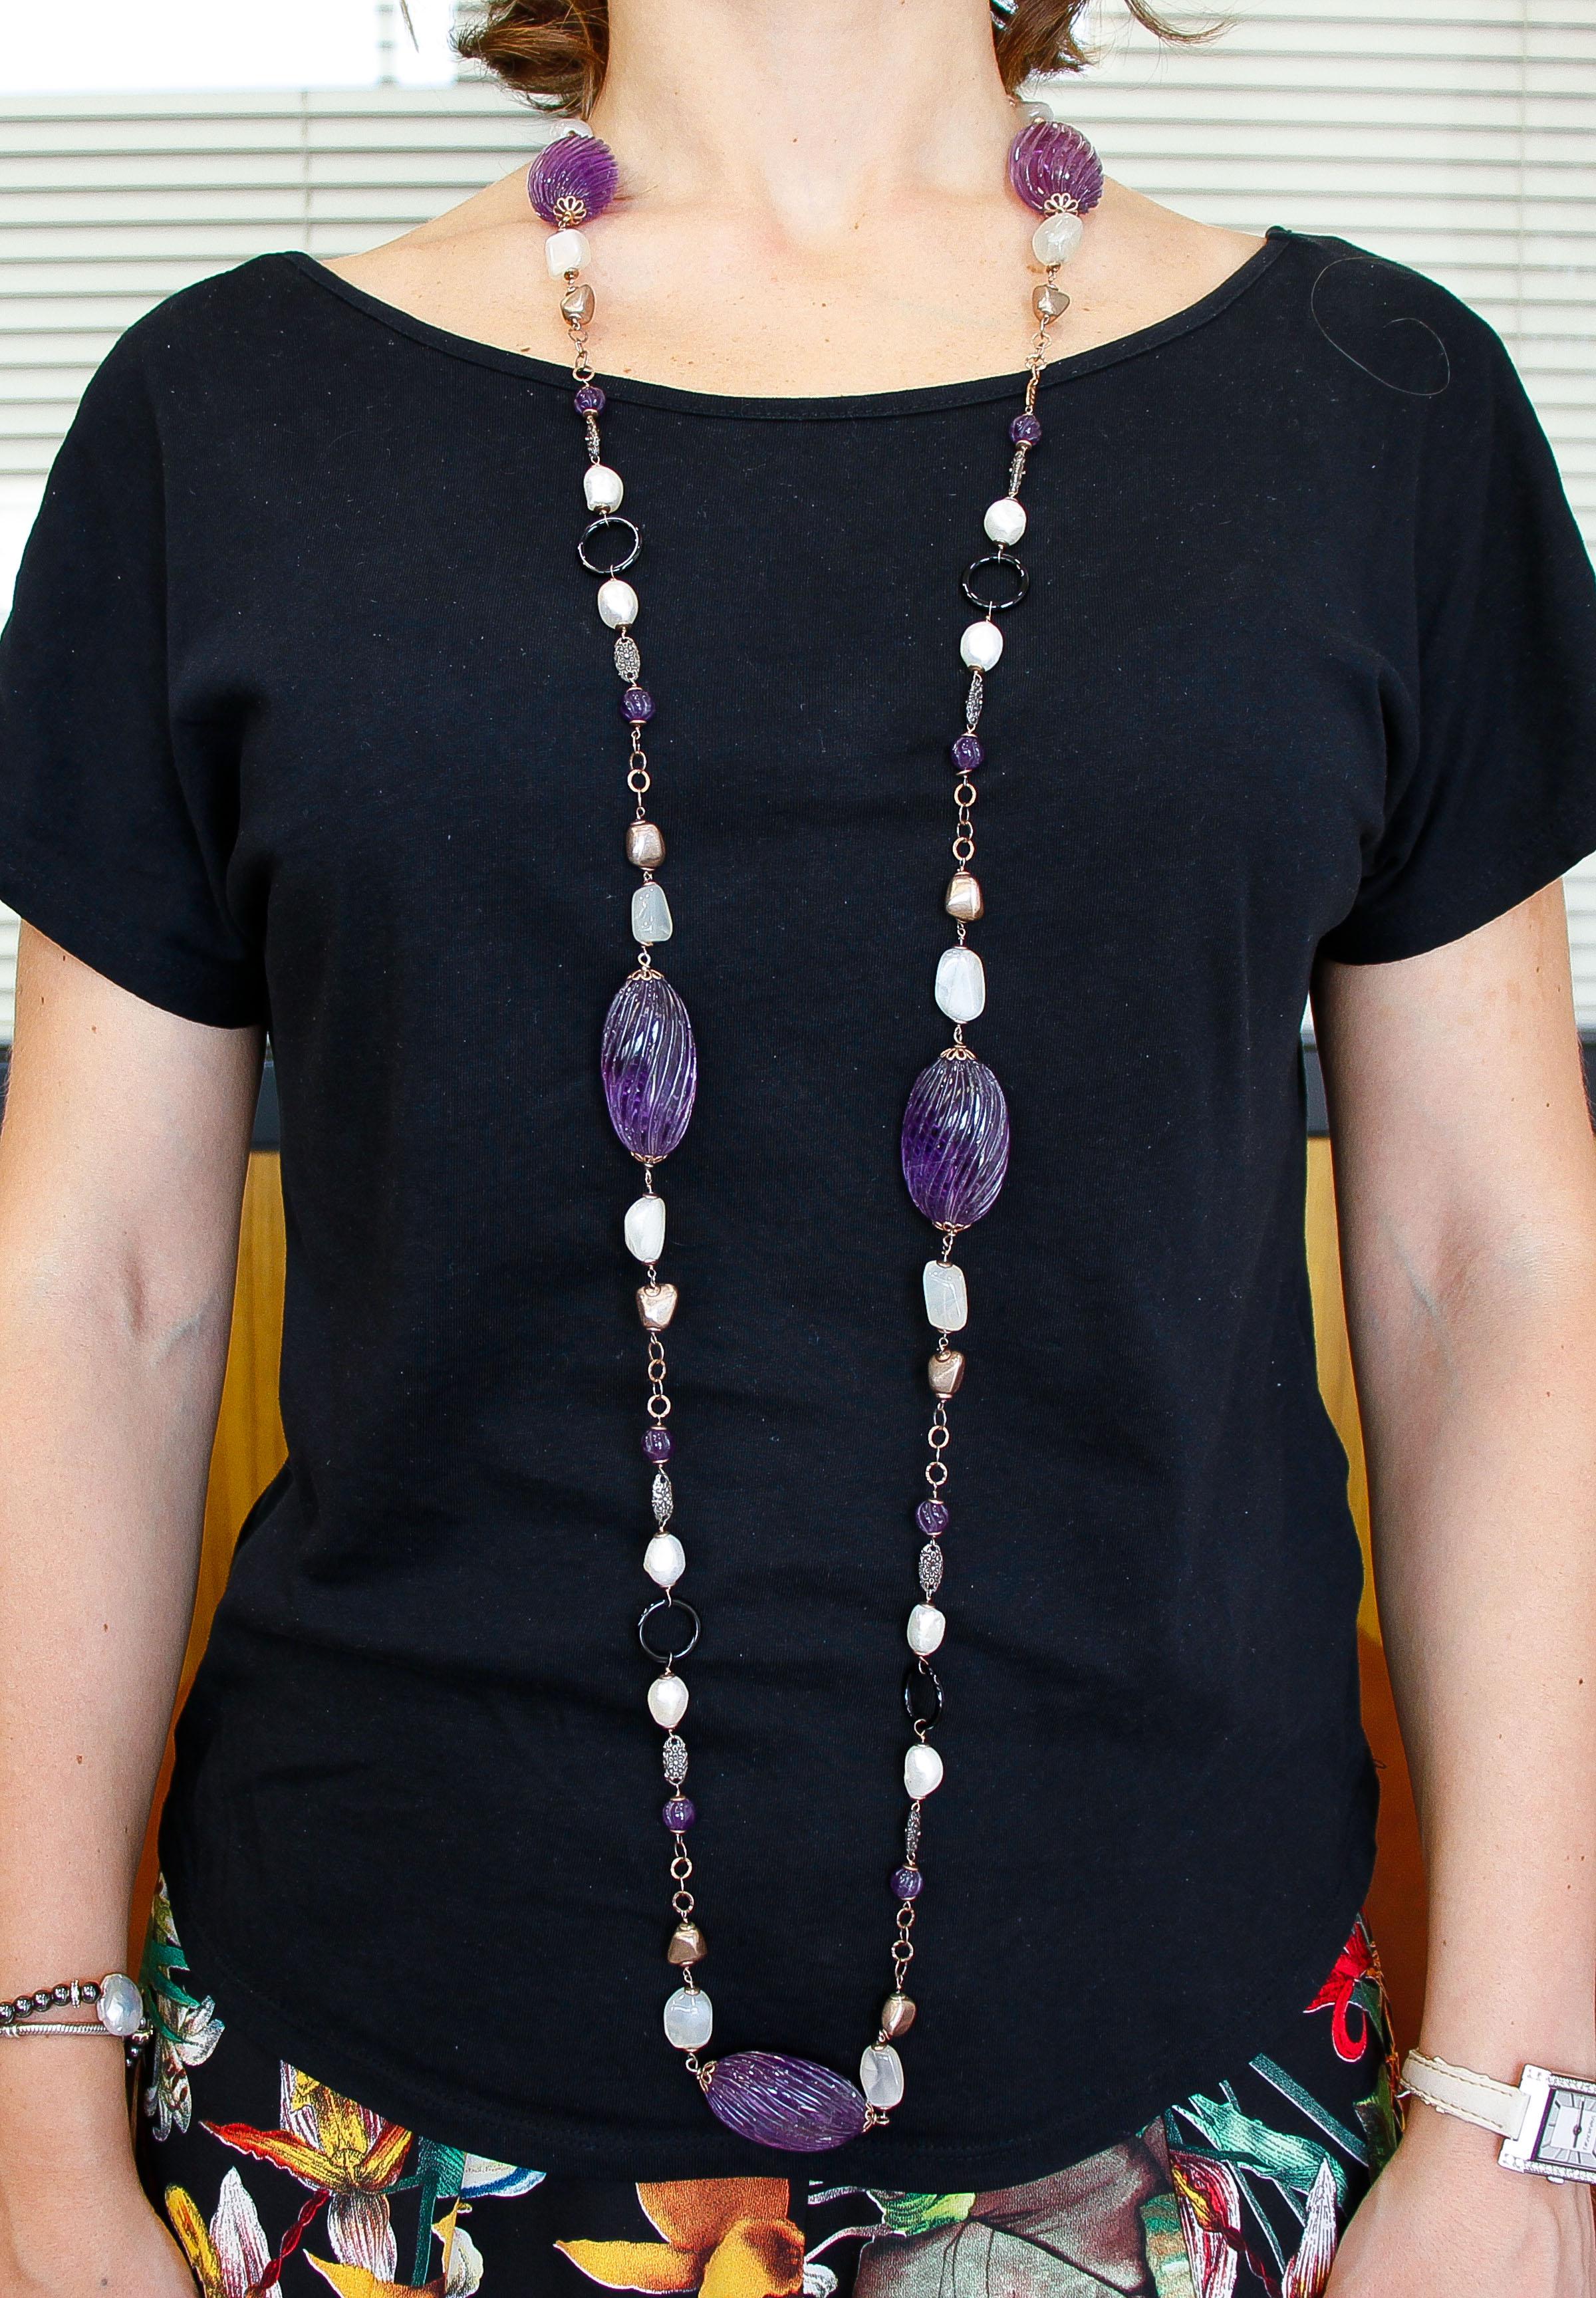 Round Cut Amethyst, Pearls, Onyx, Hard Stones, 9 Karat Rose Gold and Silver Long Necklace For Sale